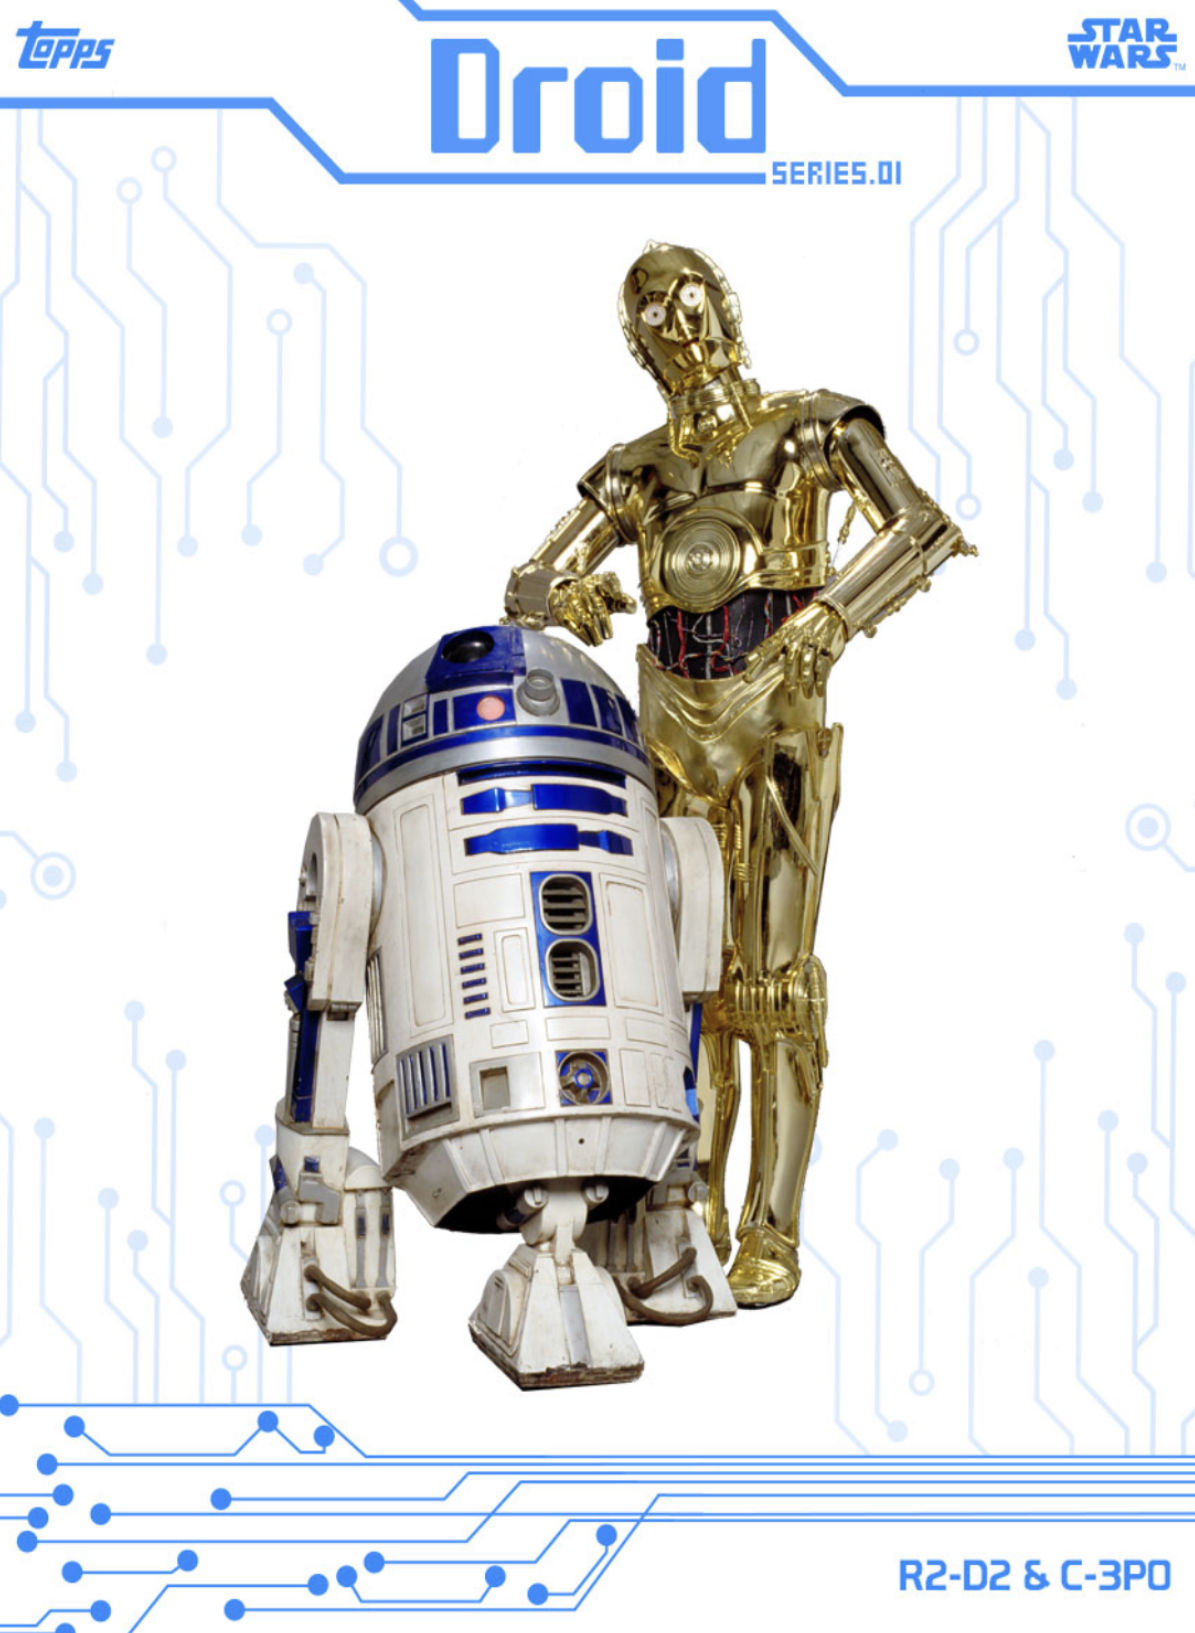 Star Wars is Epic - Click here to get your R2d2-->>